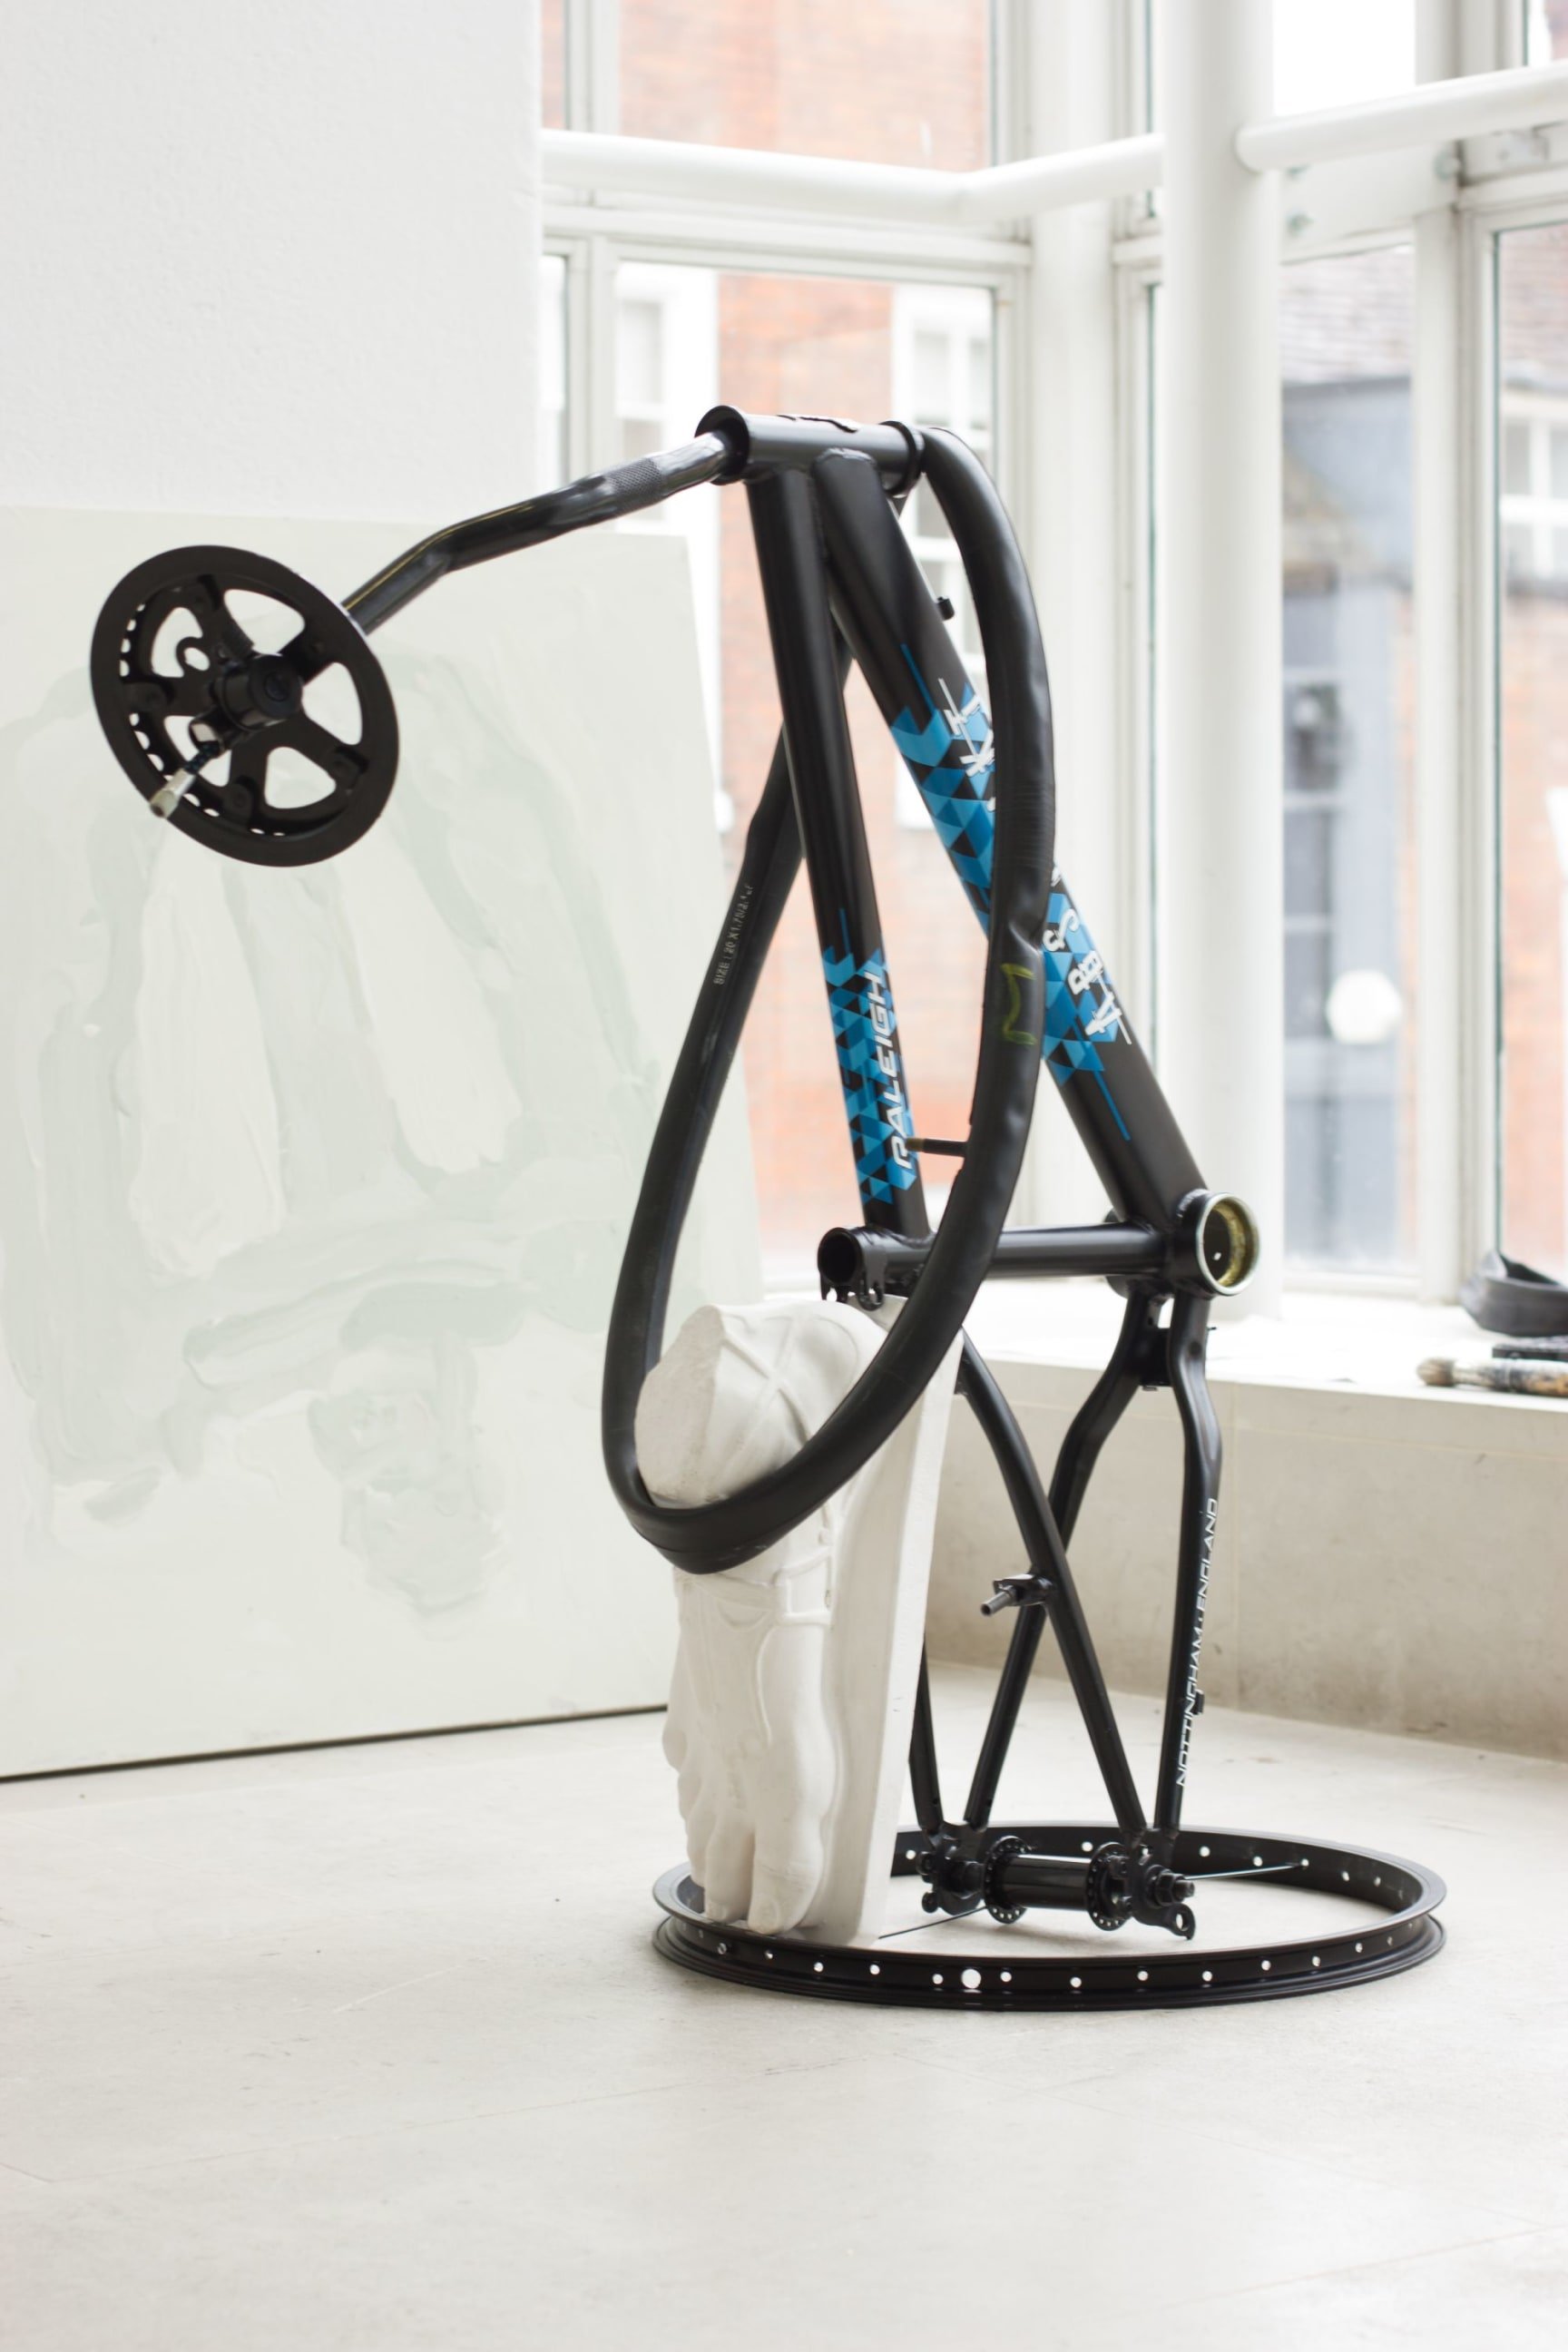 Abstract sculpture on the floor of a studio space in front of bright windows. It appears to be made of bicycle parts and a plaster foot in the style of a classical sculpture.